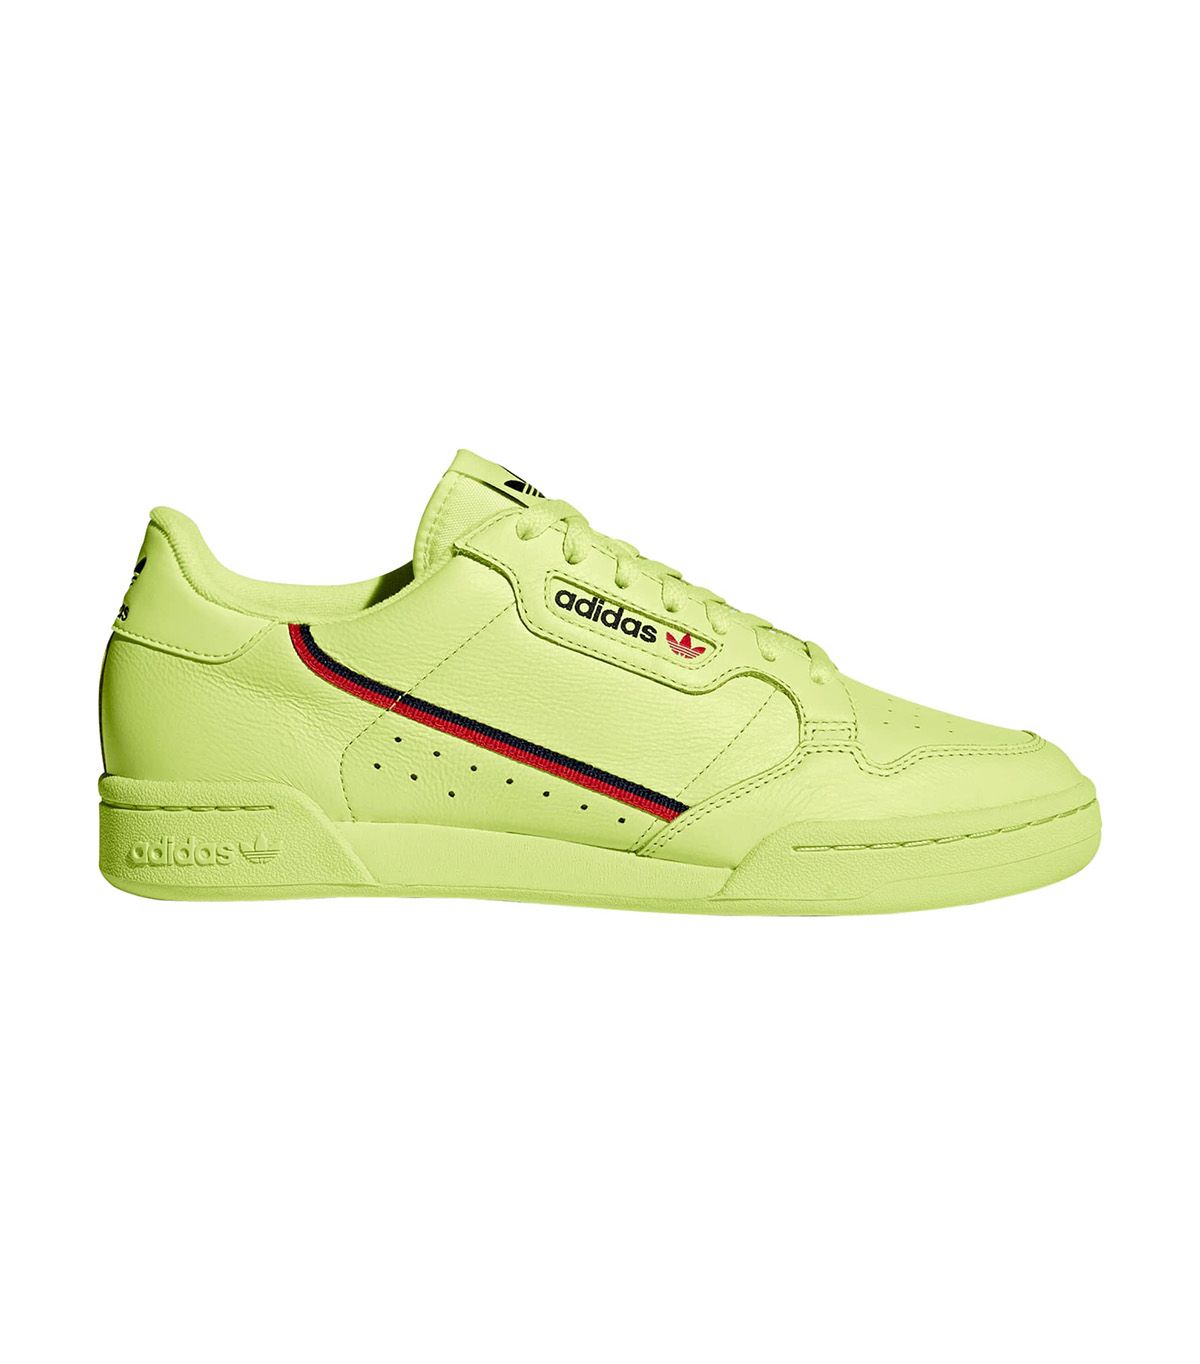 The Neon Sneaker Trend Is Happening | Who What Wear